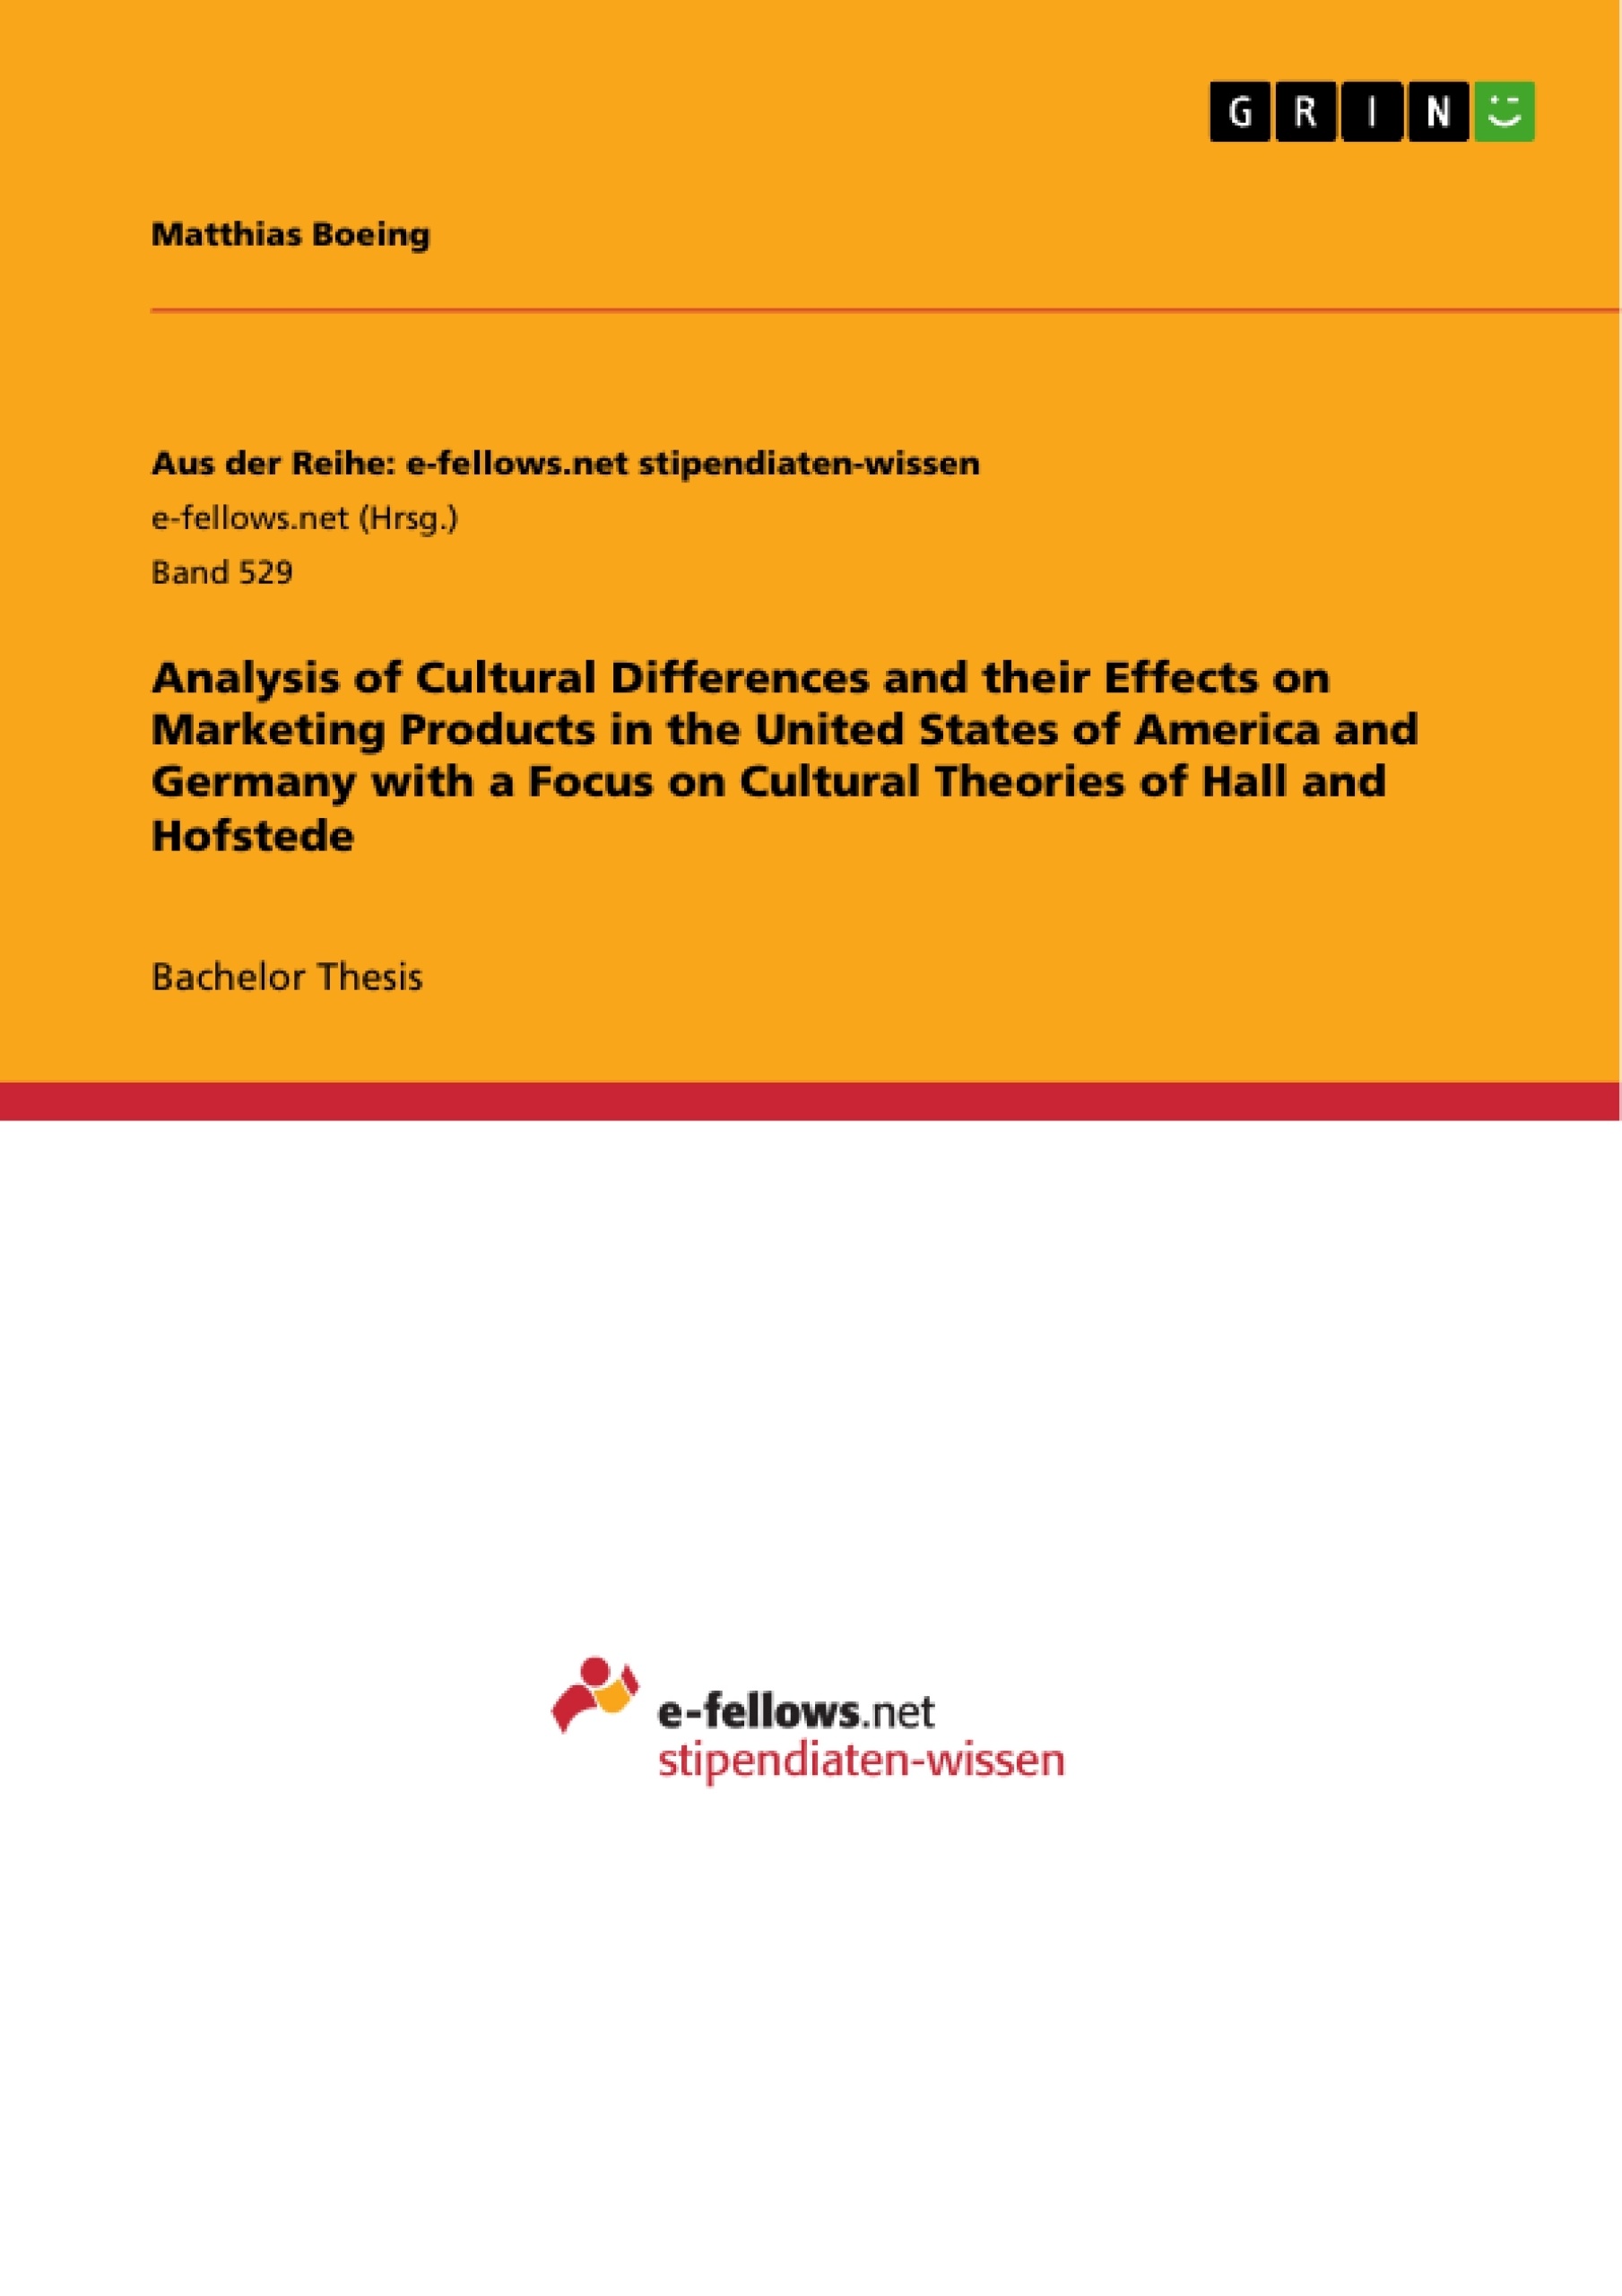 Title: Analysis of Cultural Differences and their Effects on Marketing Products in the United States of America and Germany with a Focus on Cultural Theories of Hall and Hofstede